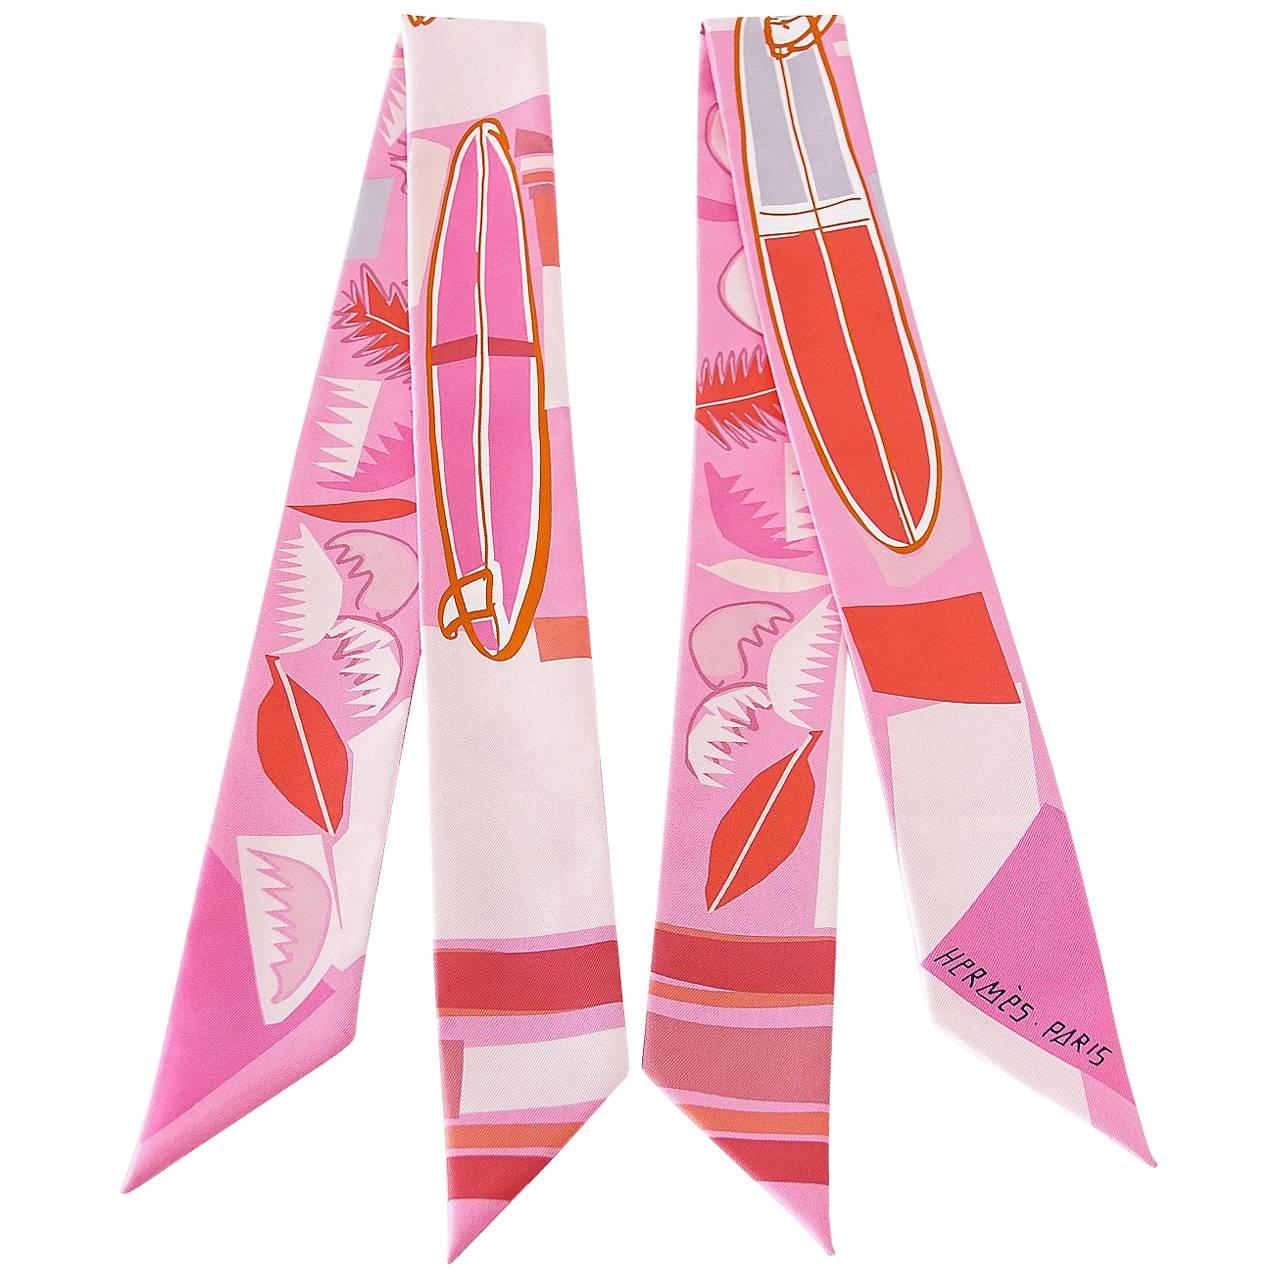 Hermes Twilly Pink Sea Surf and Fun Limited Edition Set of 2  by Filipe Jardim